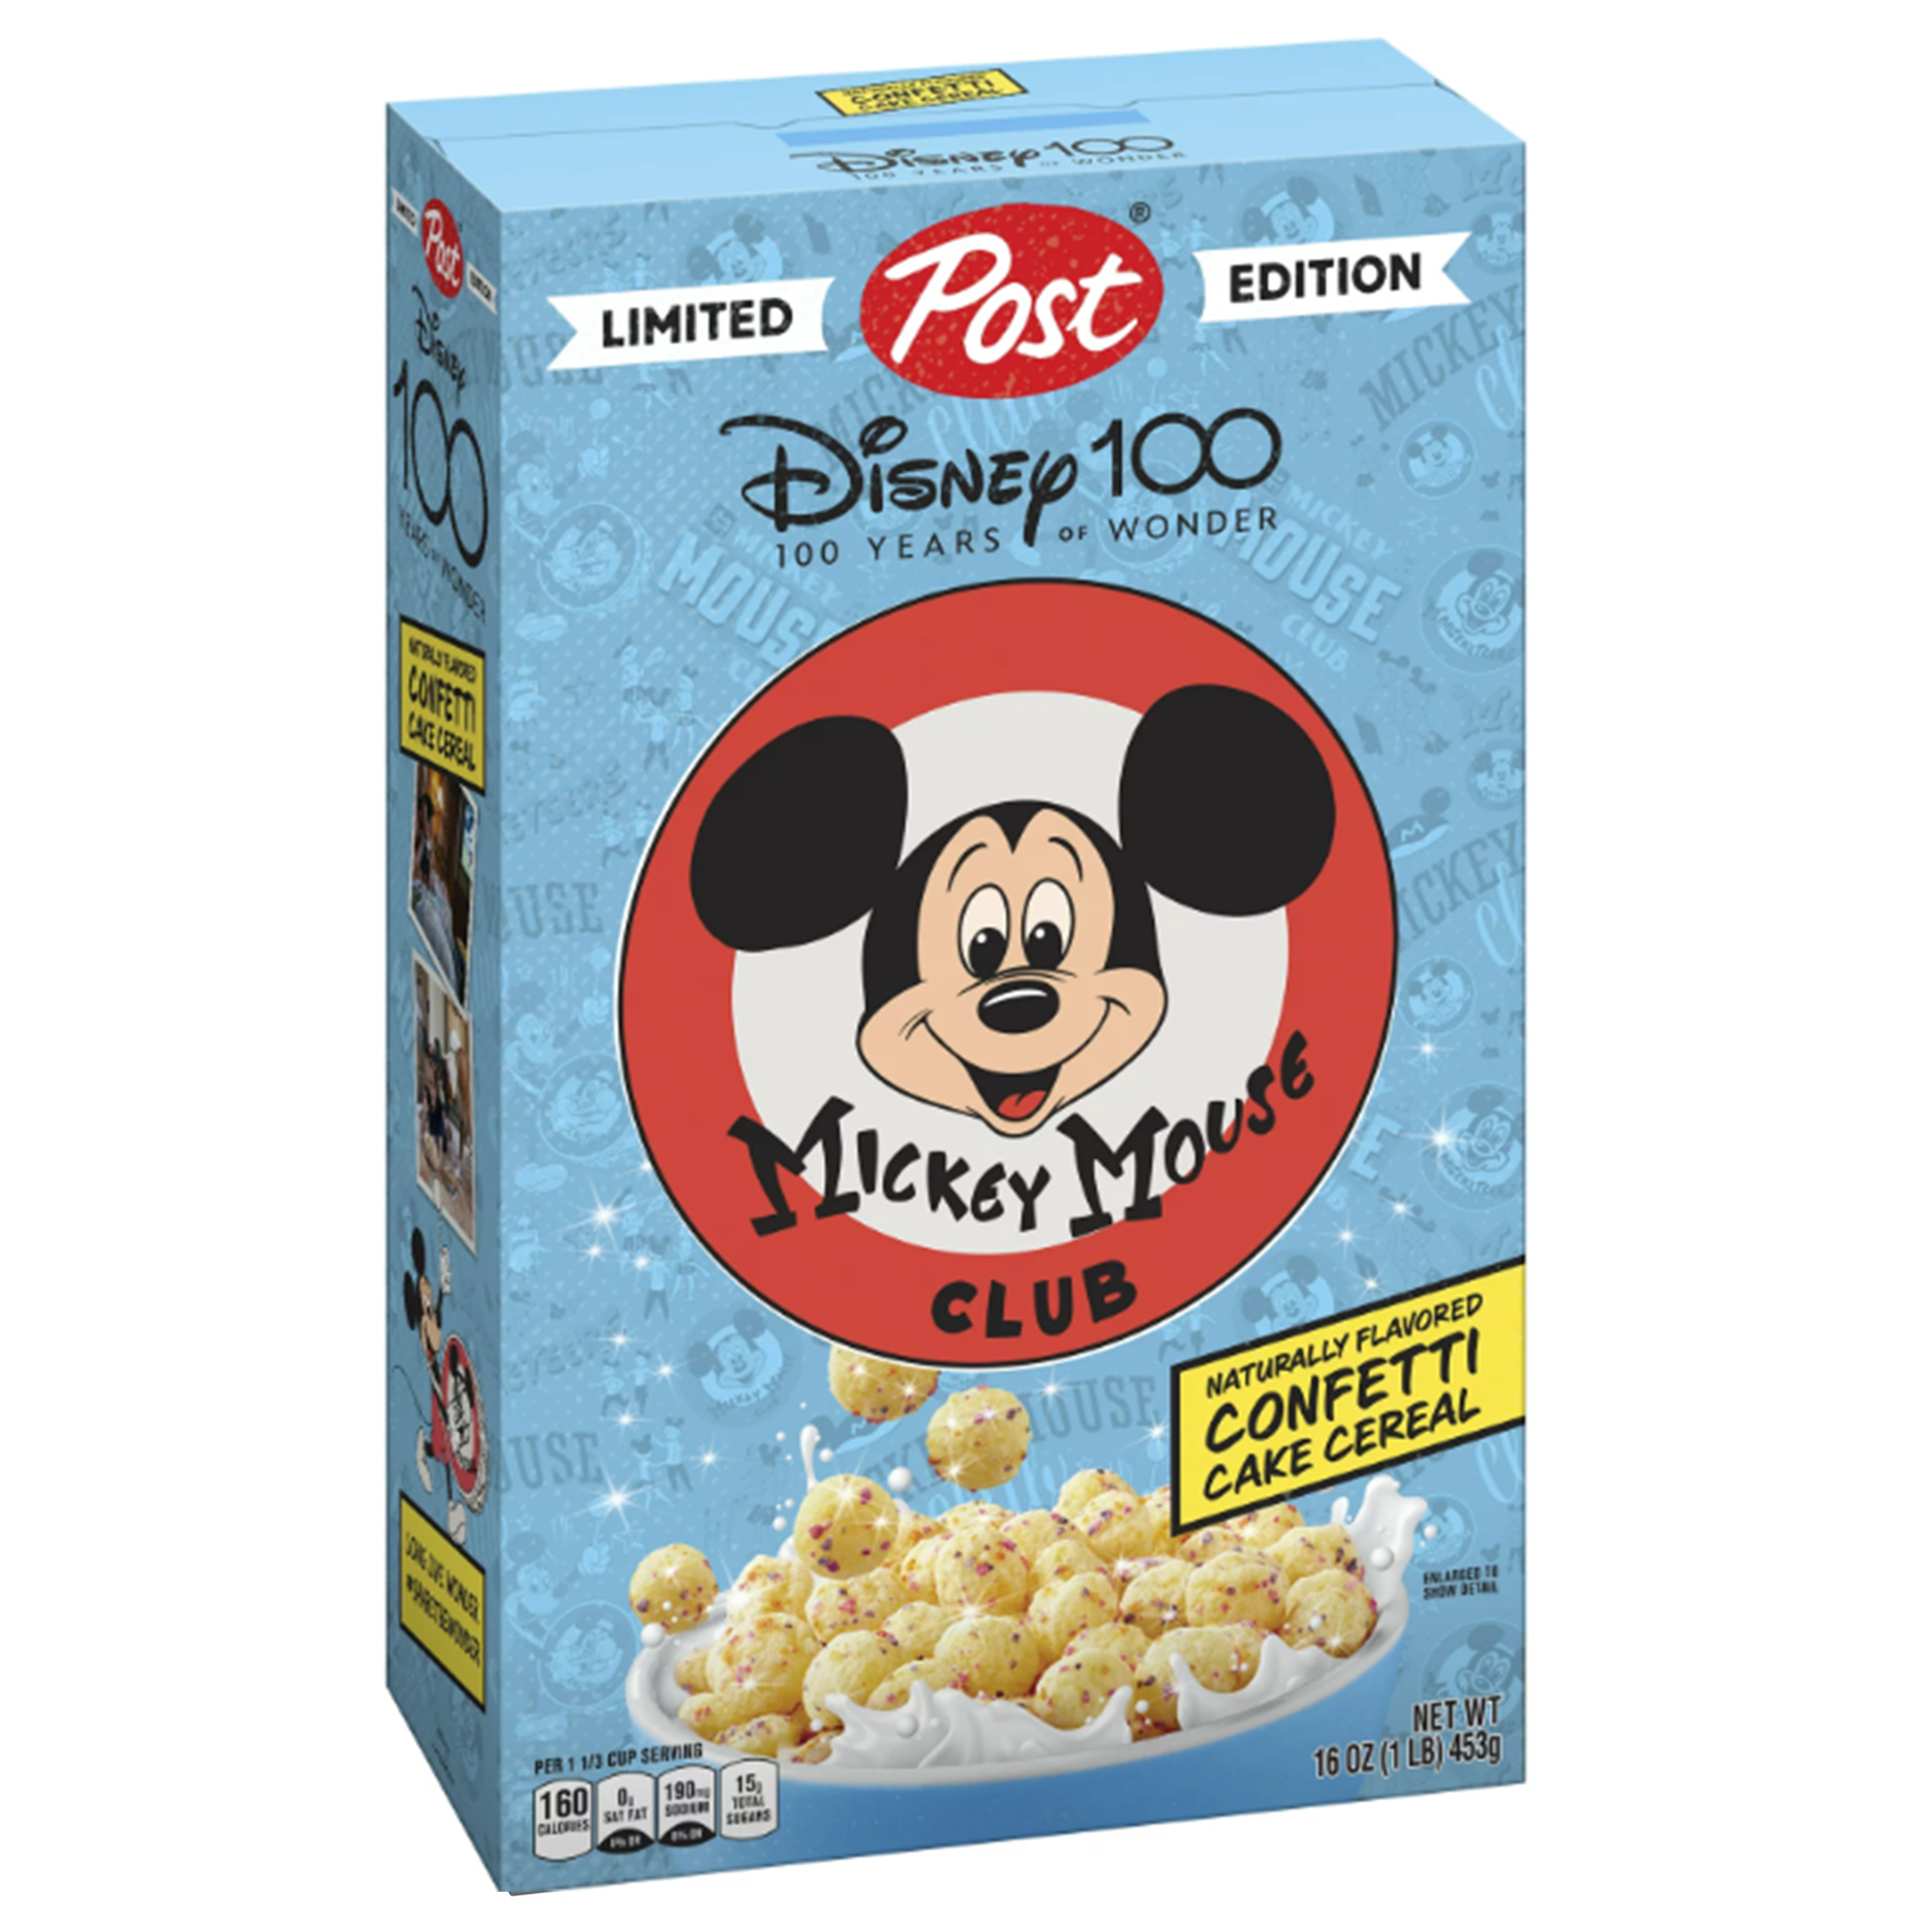 Disney100 Confetti Cake Micky Mouse Cereal